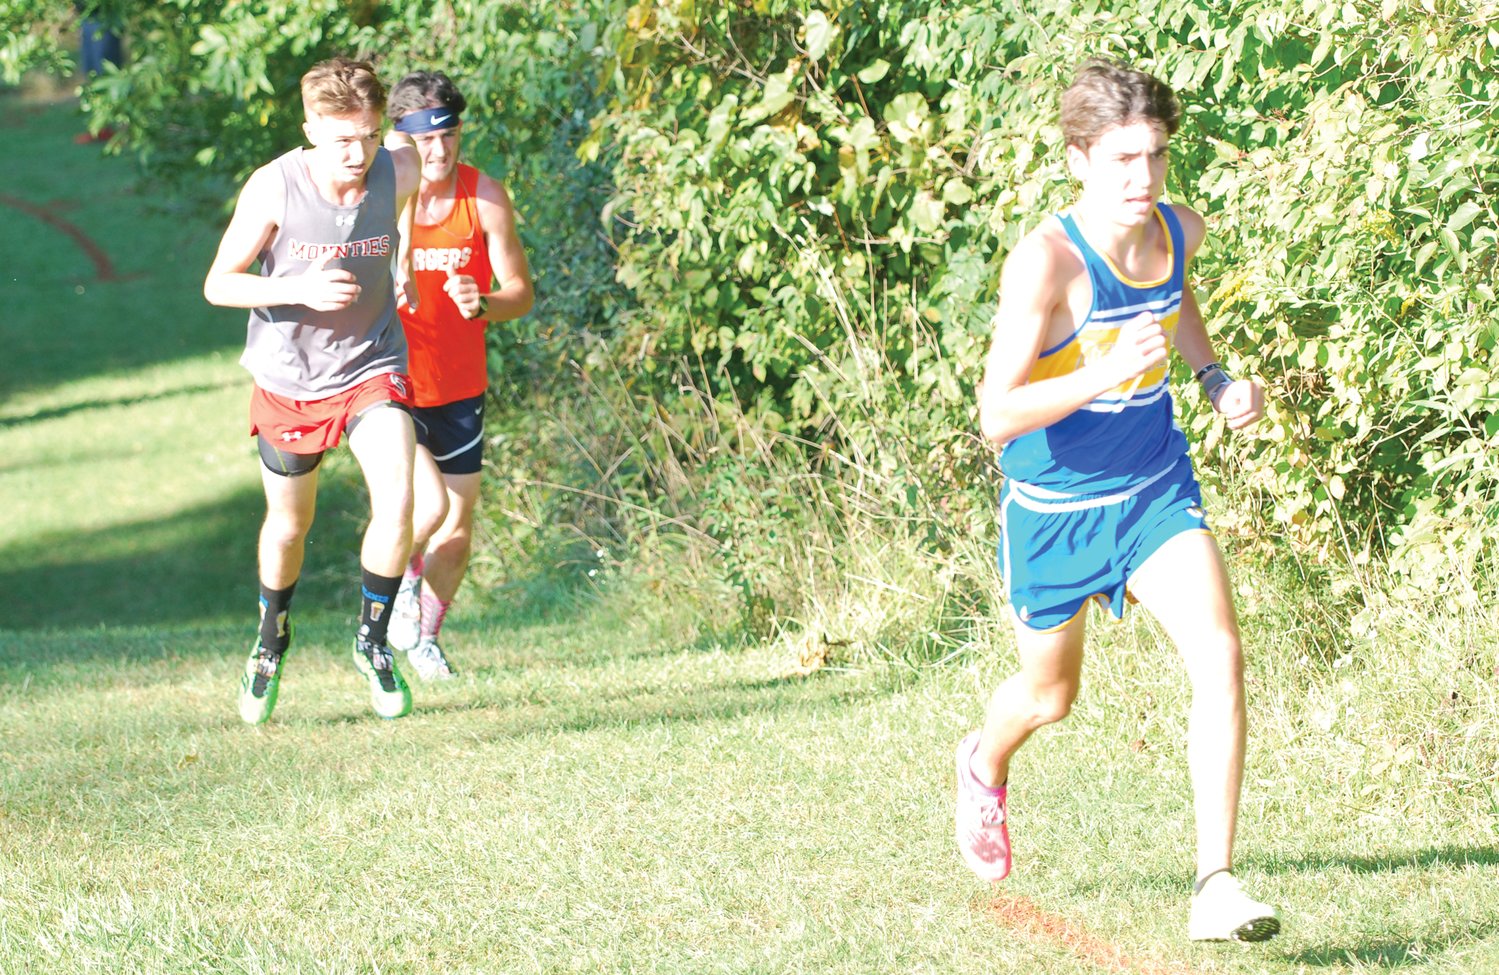 Crawfordsville's Ryann Miller, North Montgomery's Elijah McCartney, and Southmont's Mason Cass led the pack on Thursday night, before Cass pulled away for the county win.